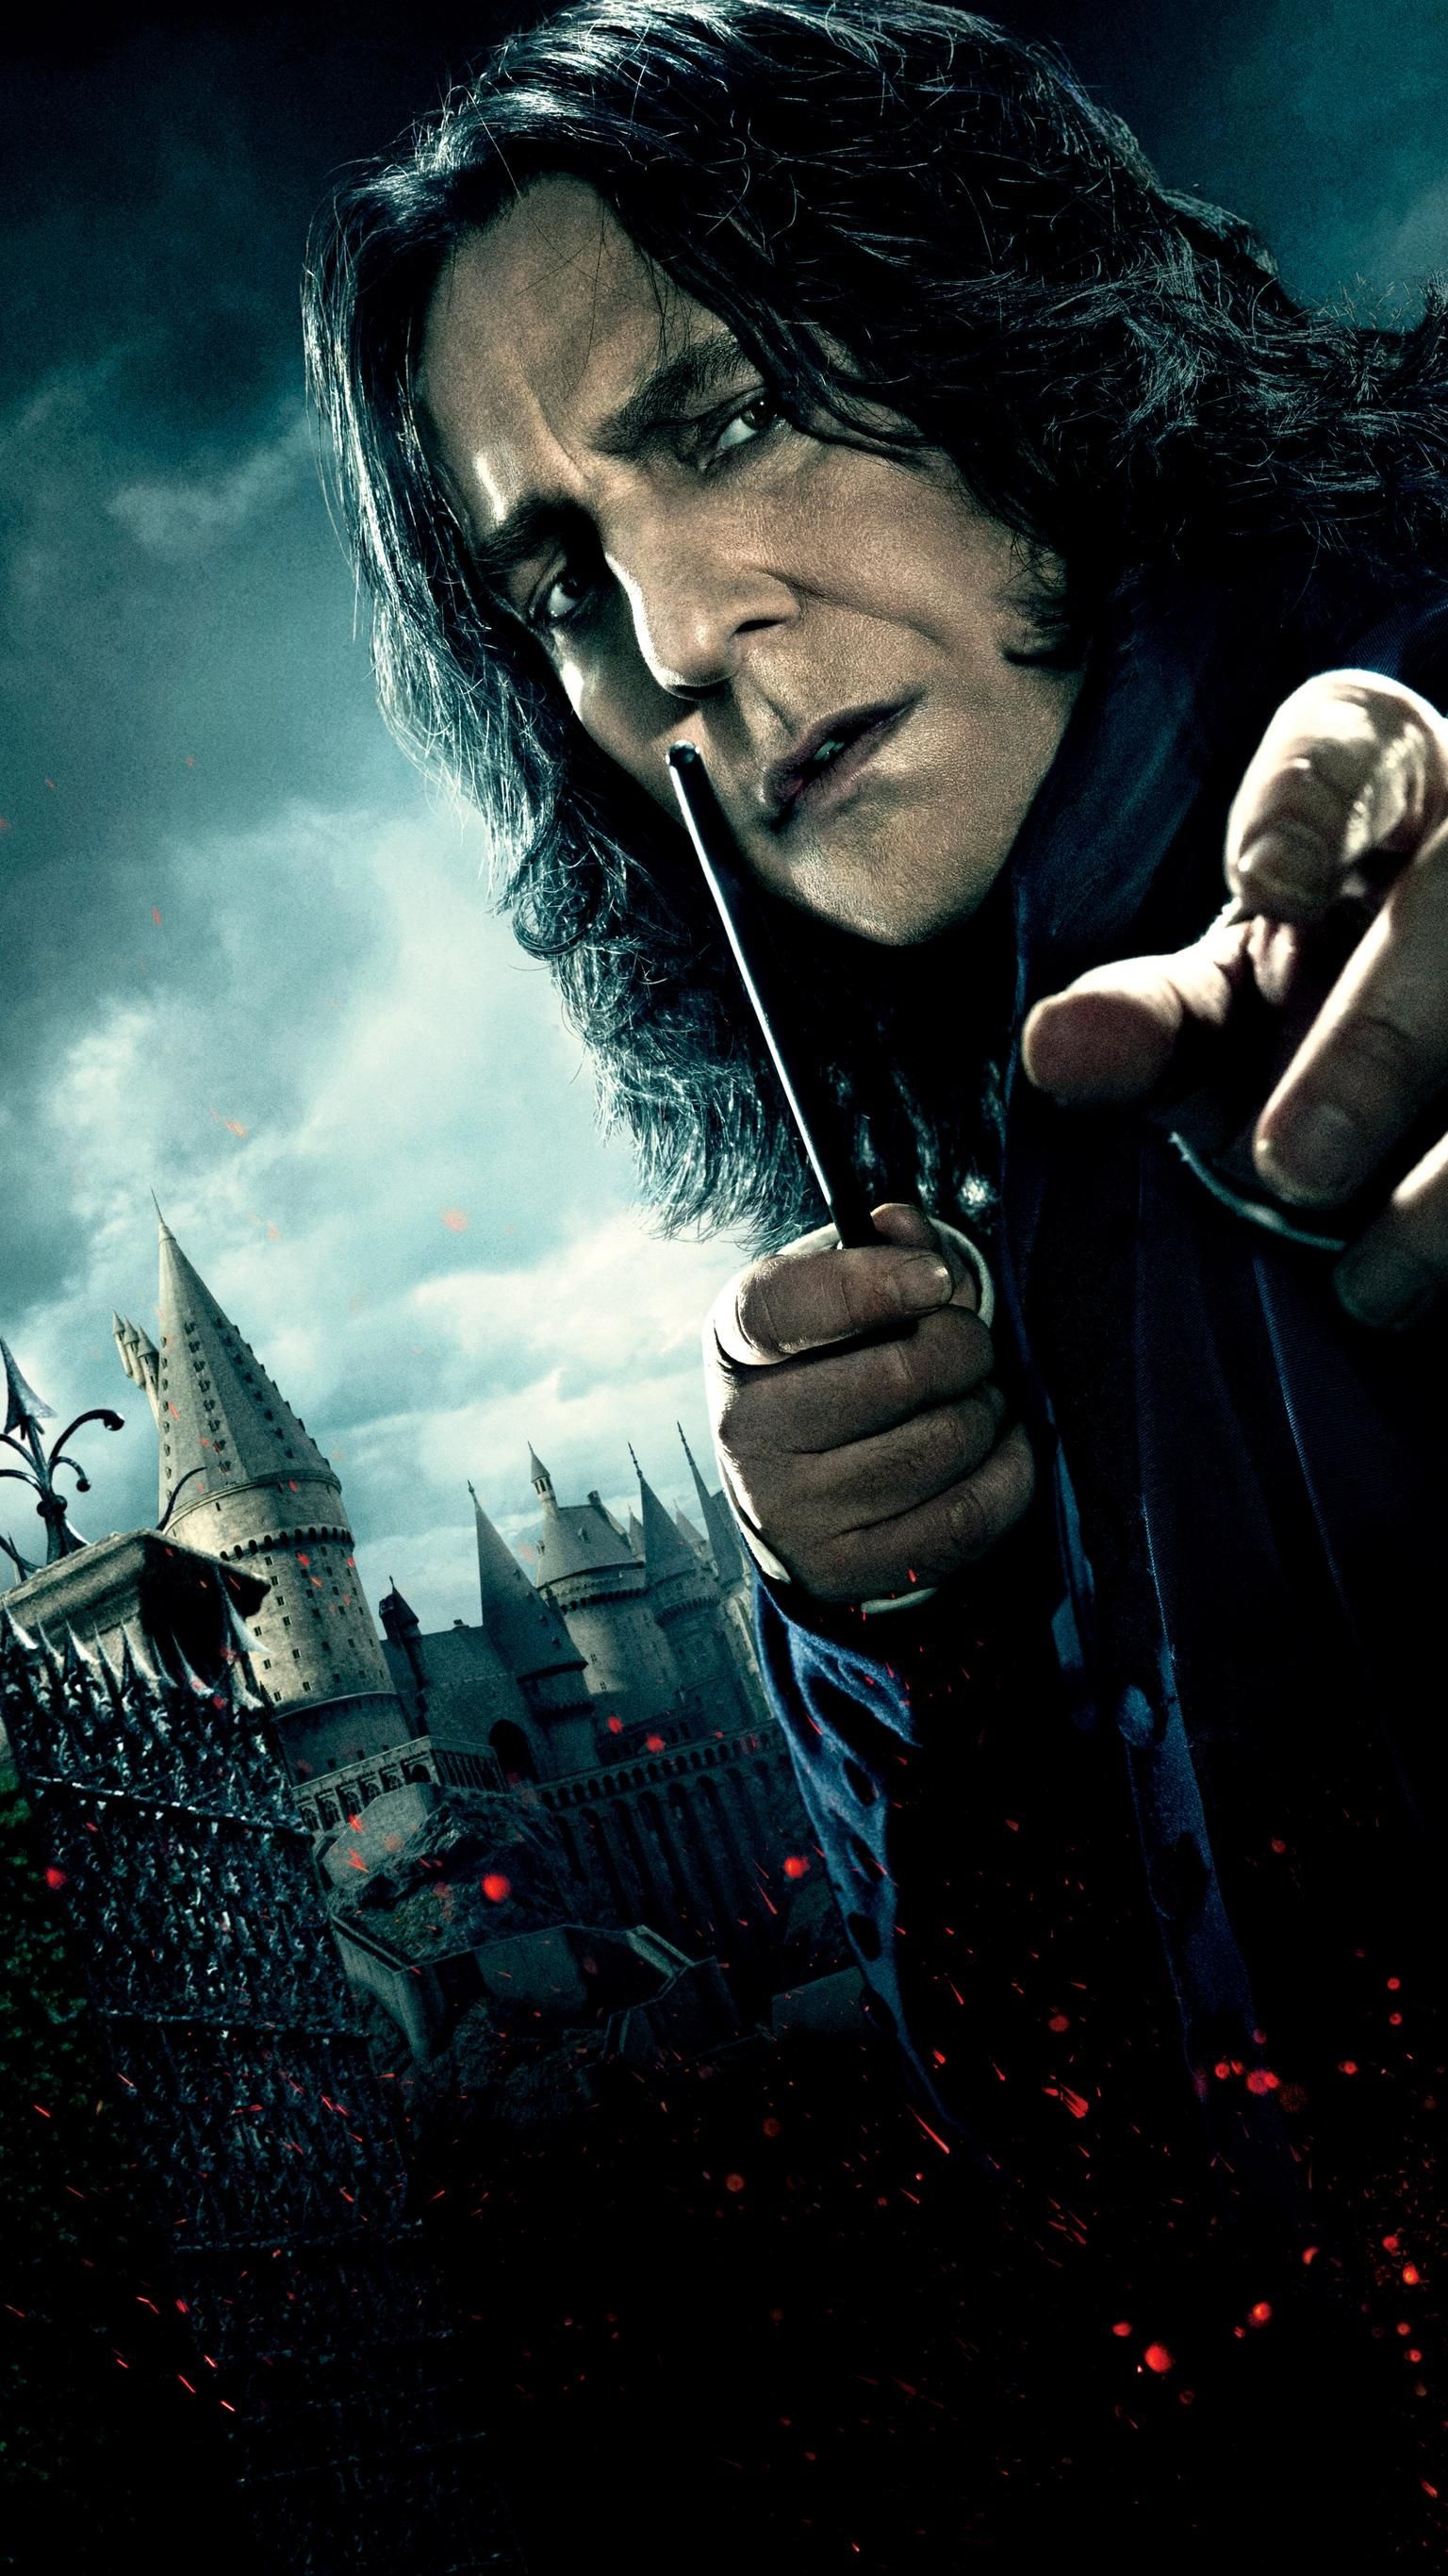 Severus Snape: Harry Potter and the Deathly Hallows: Part 1 (2010), Alan Rickman. 1540x2740 HD Wallpaper.